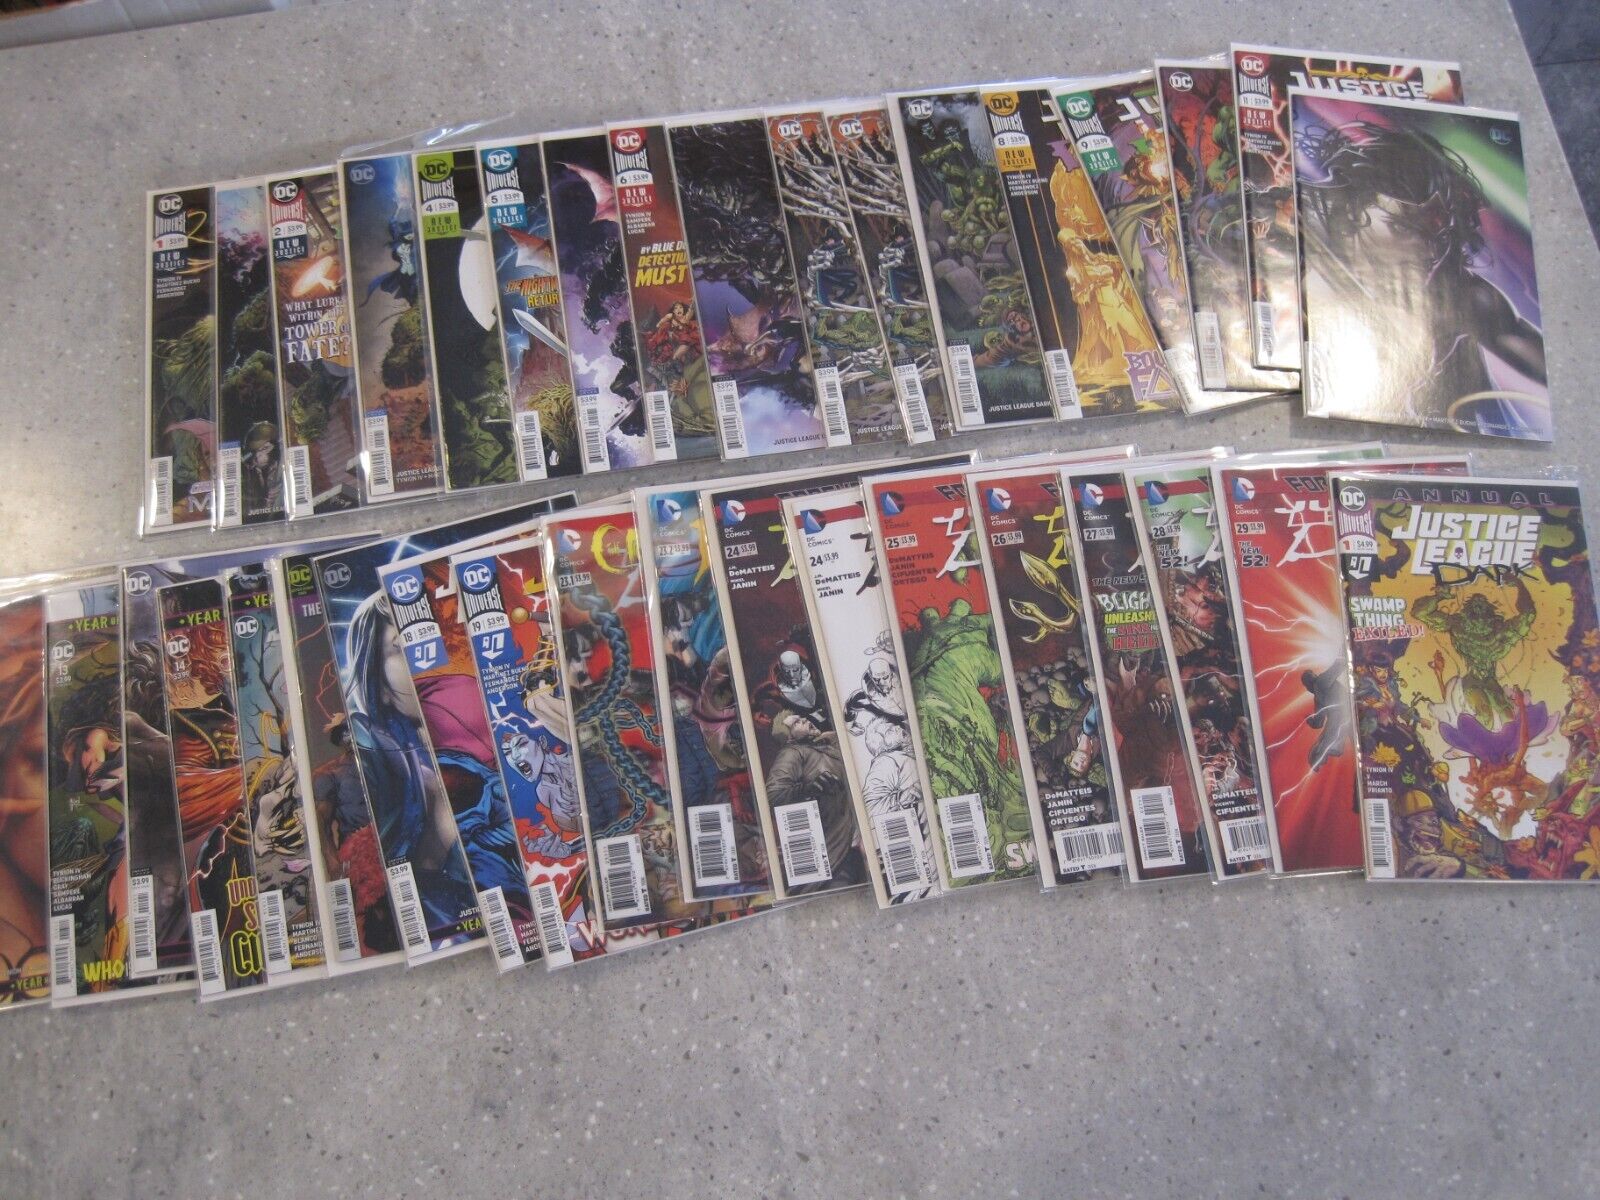 Justice League Dark #1-29 Incomplete Lot of 37 DC Comics + Variants + Annual (1B